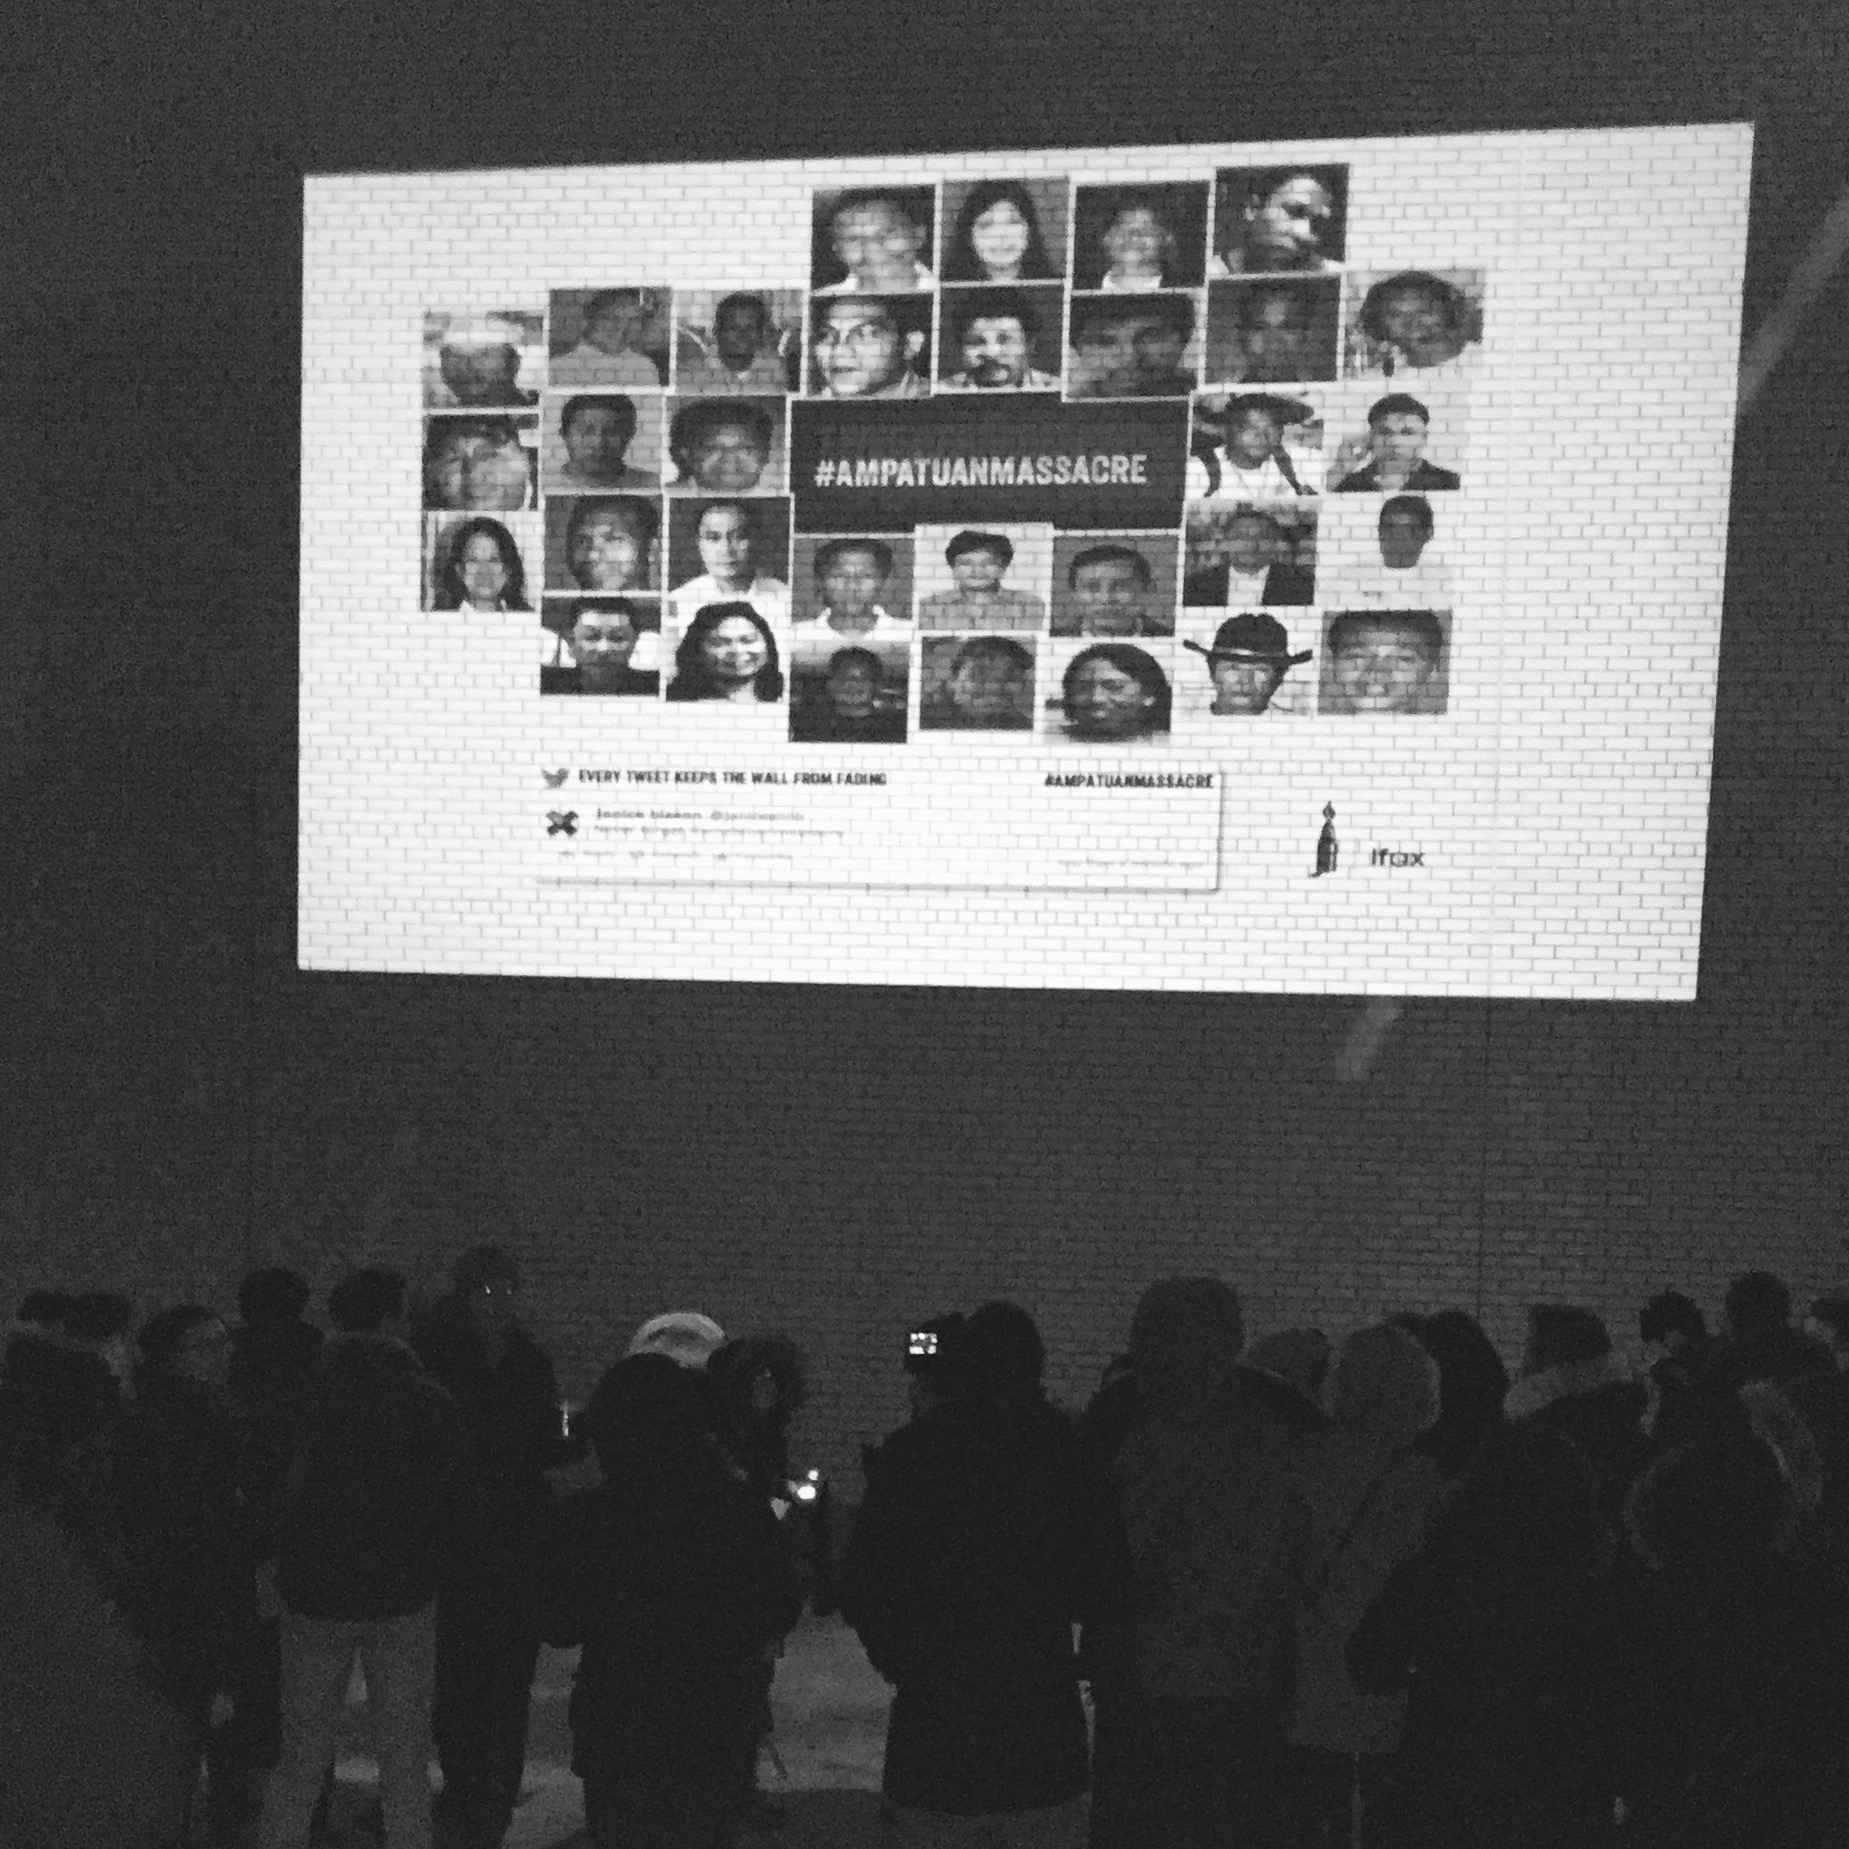 Torontonians gathered on 2 December to tweet for justice in the Ampatuan Massacre case